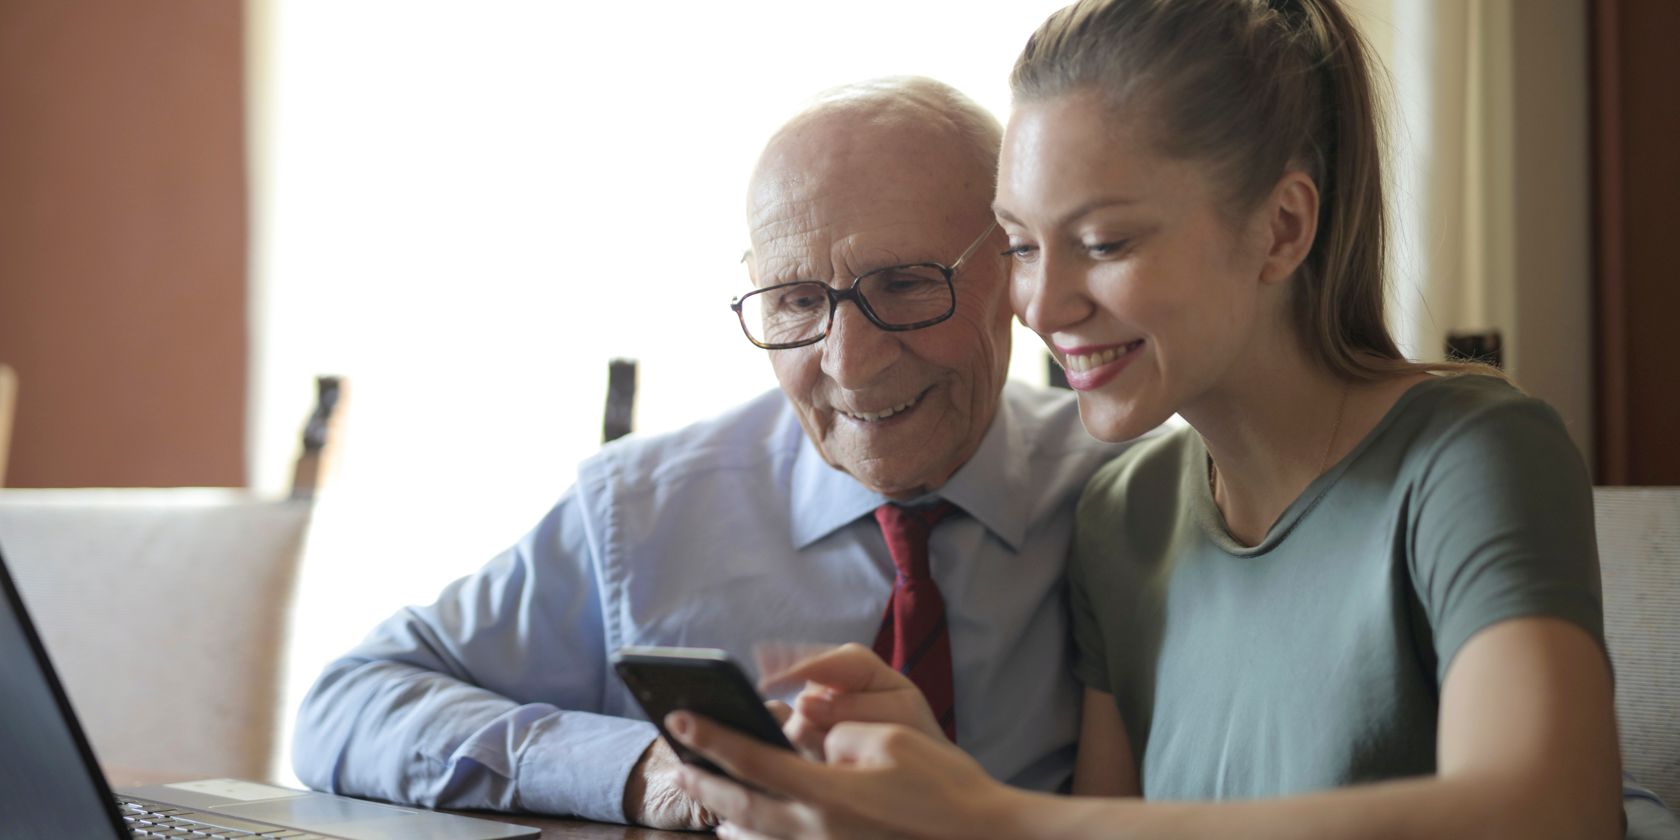 A younger woman and older man looking at a smartphone together